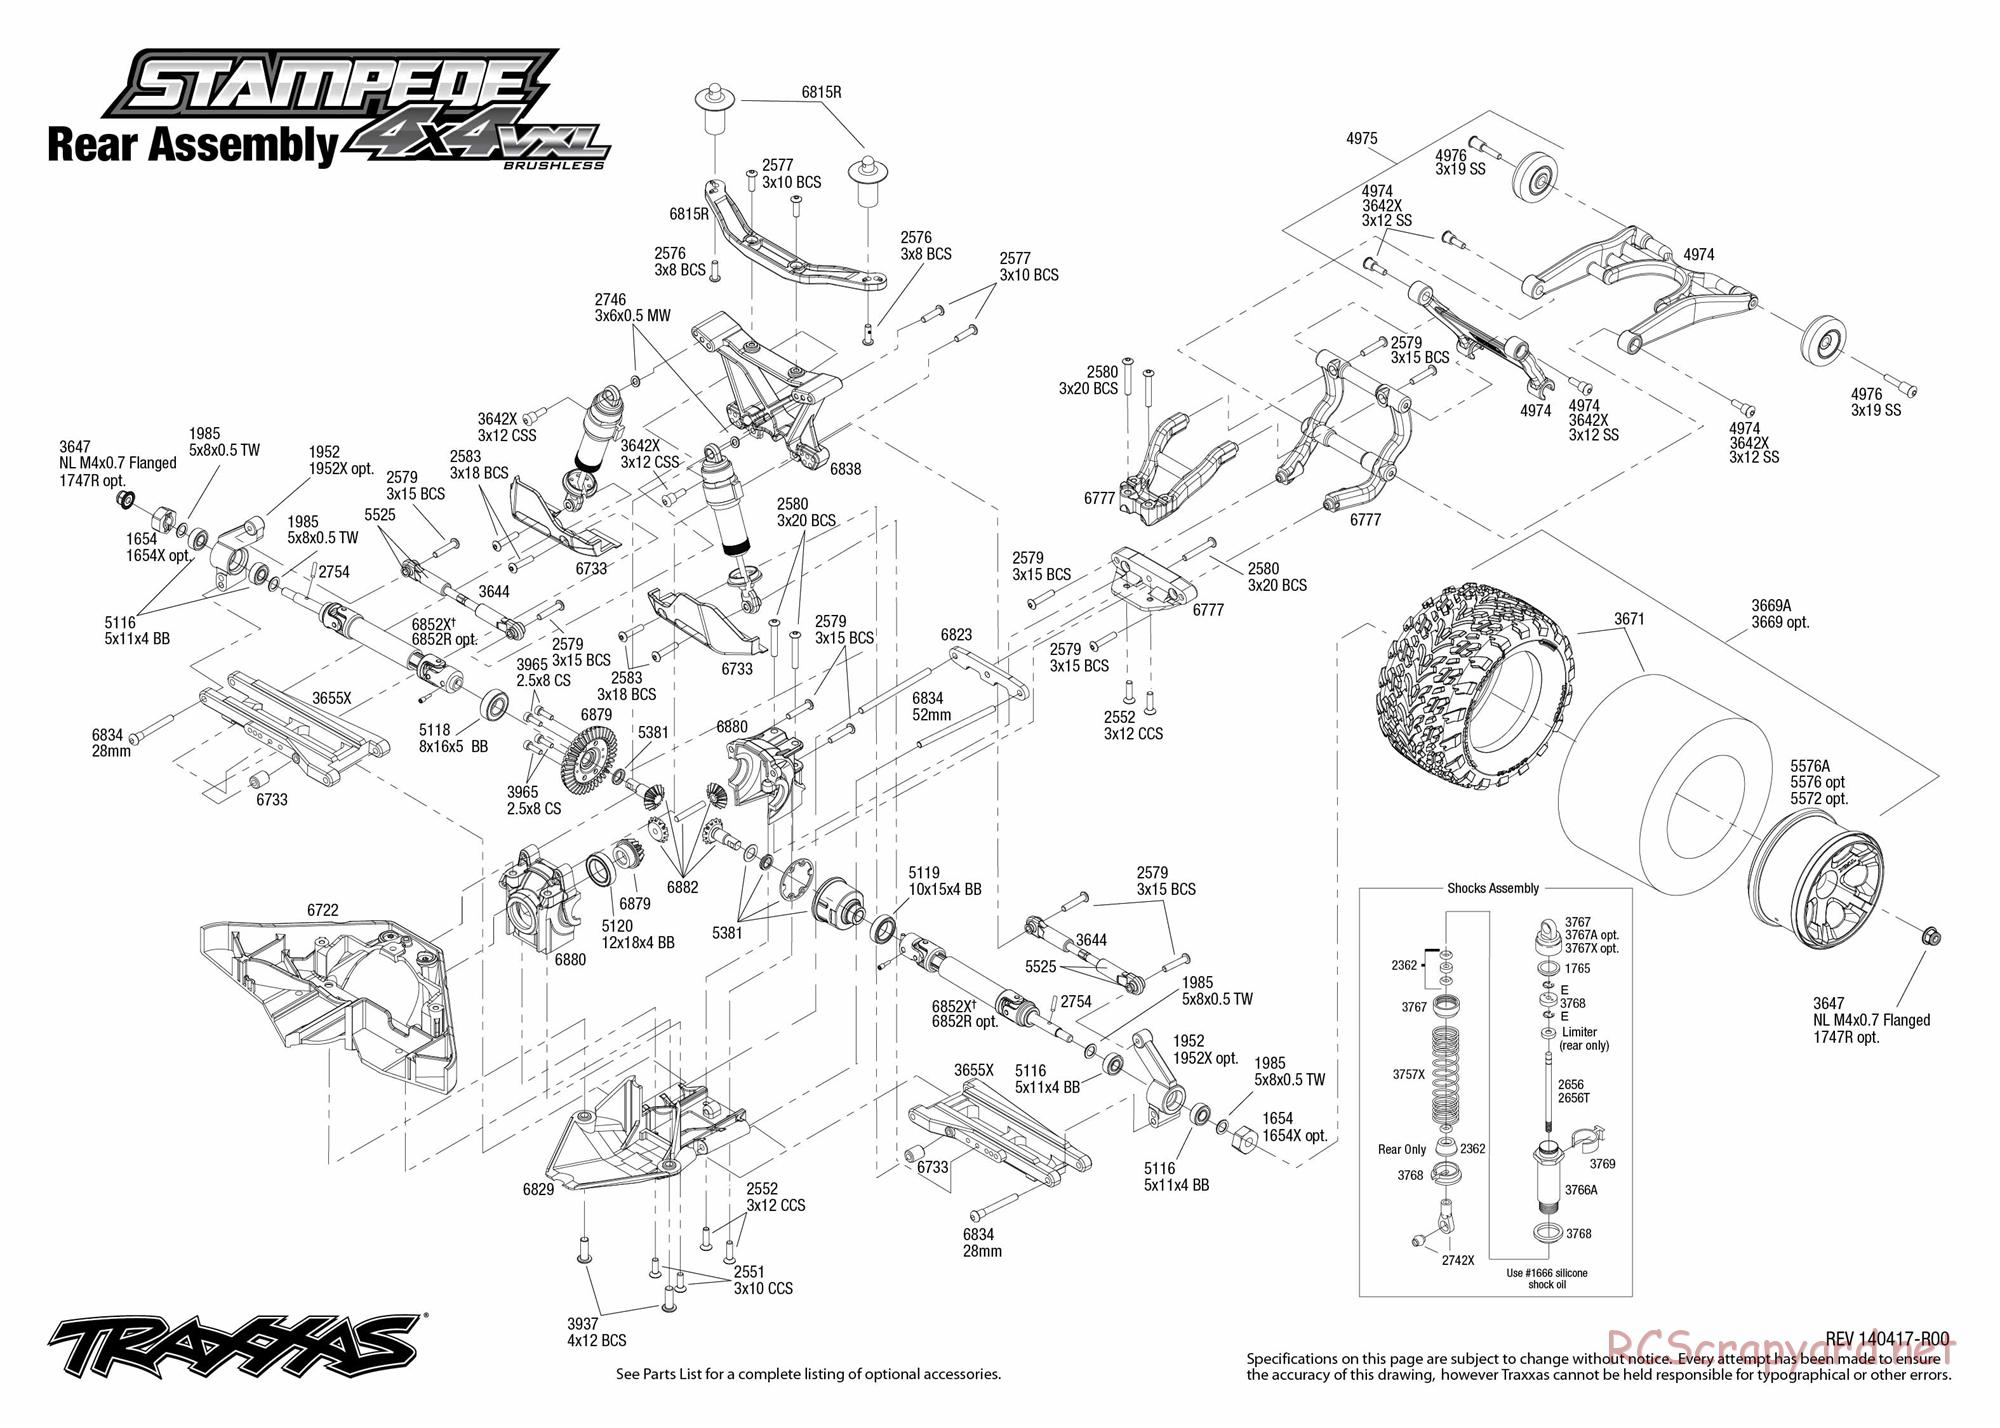 Traxxas - Stampede 4x4 VXL (2014) - Exploded Views - Page 4